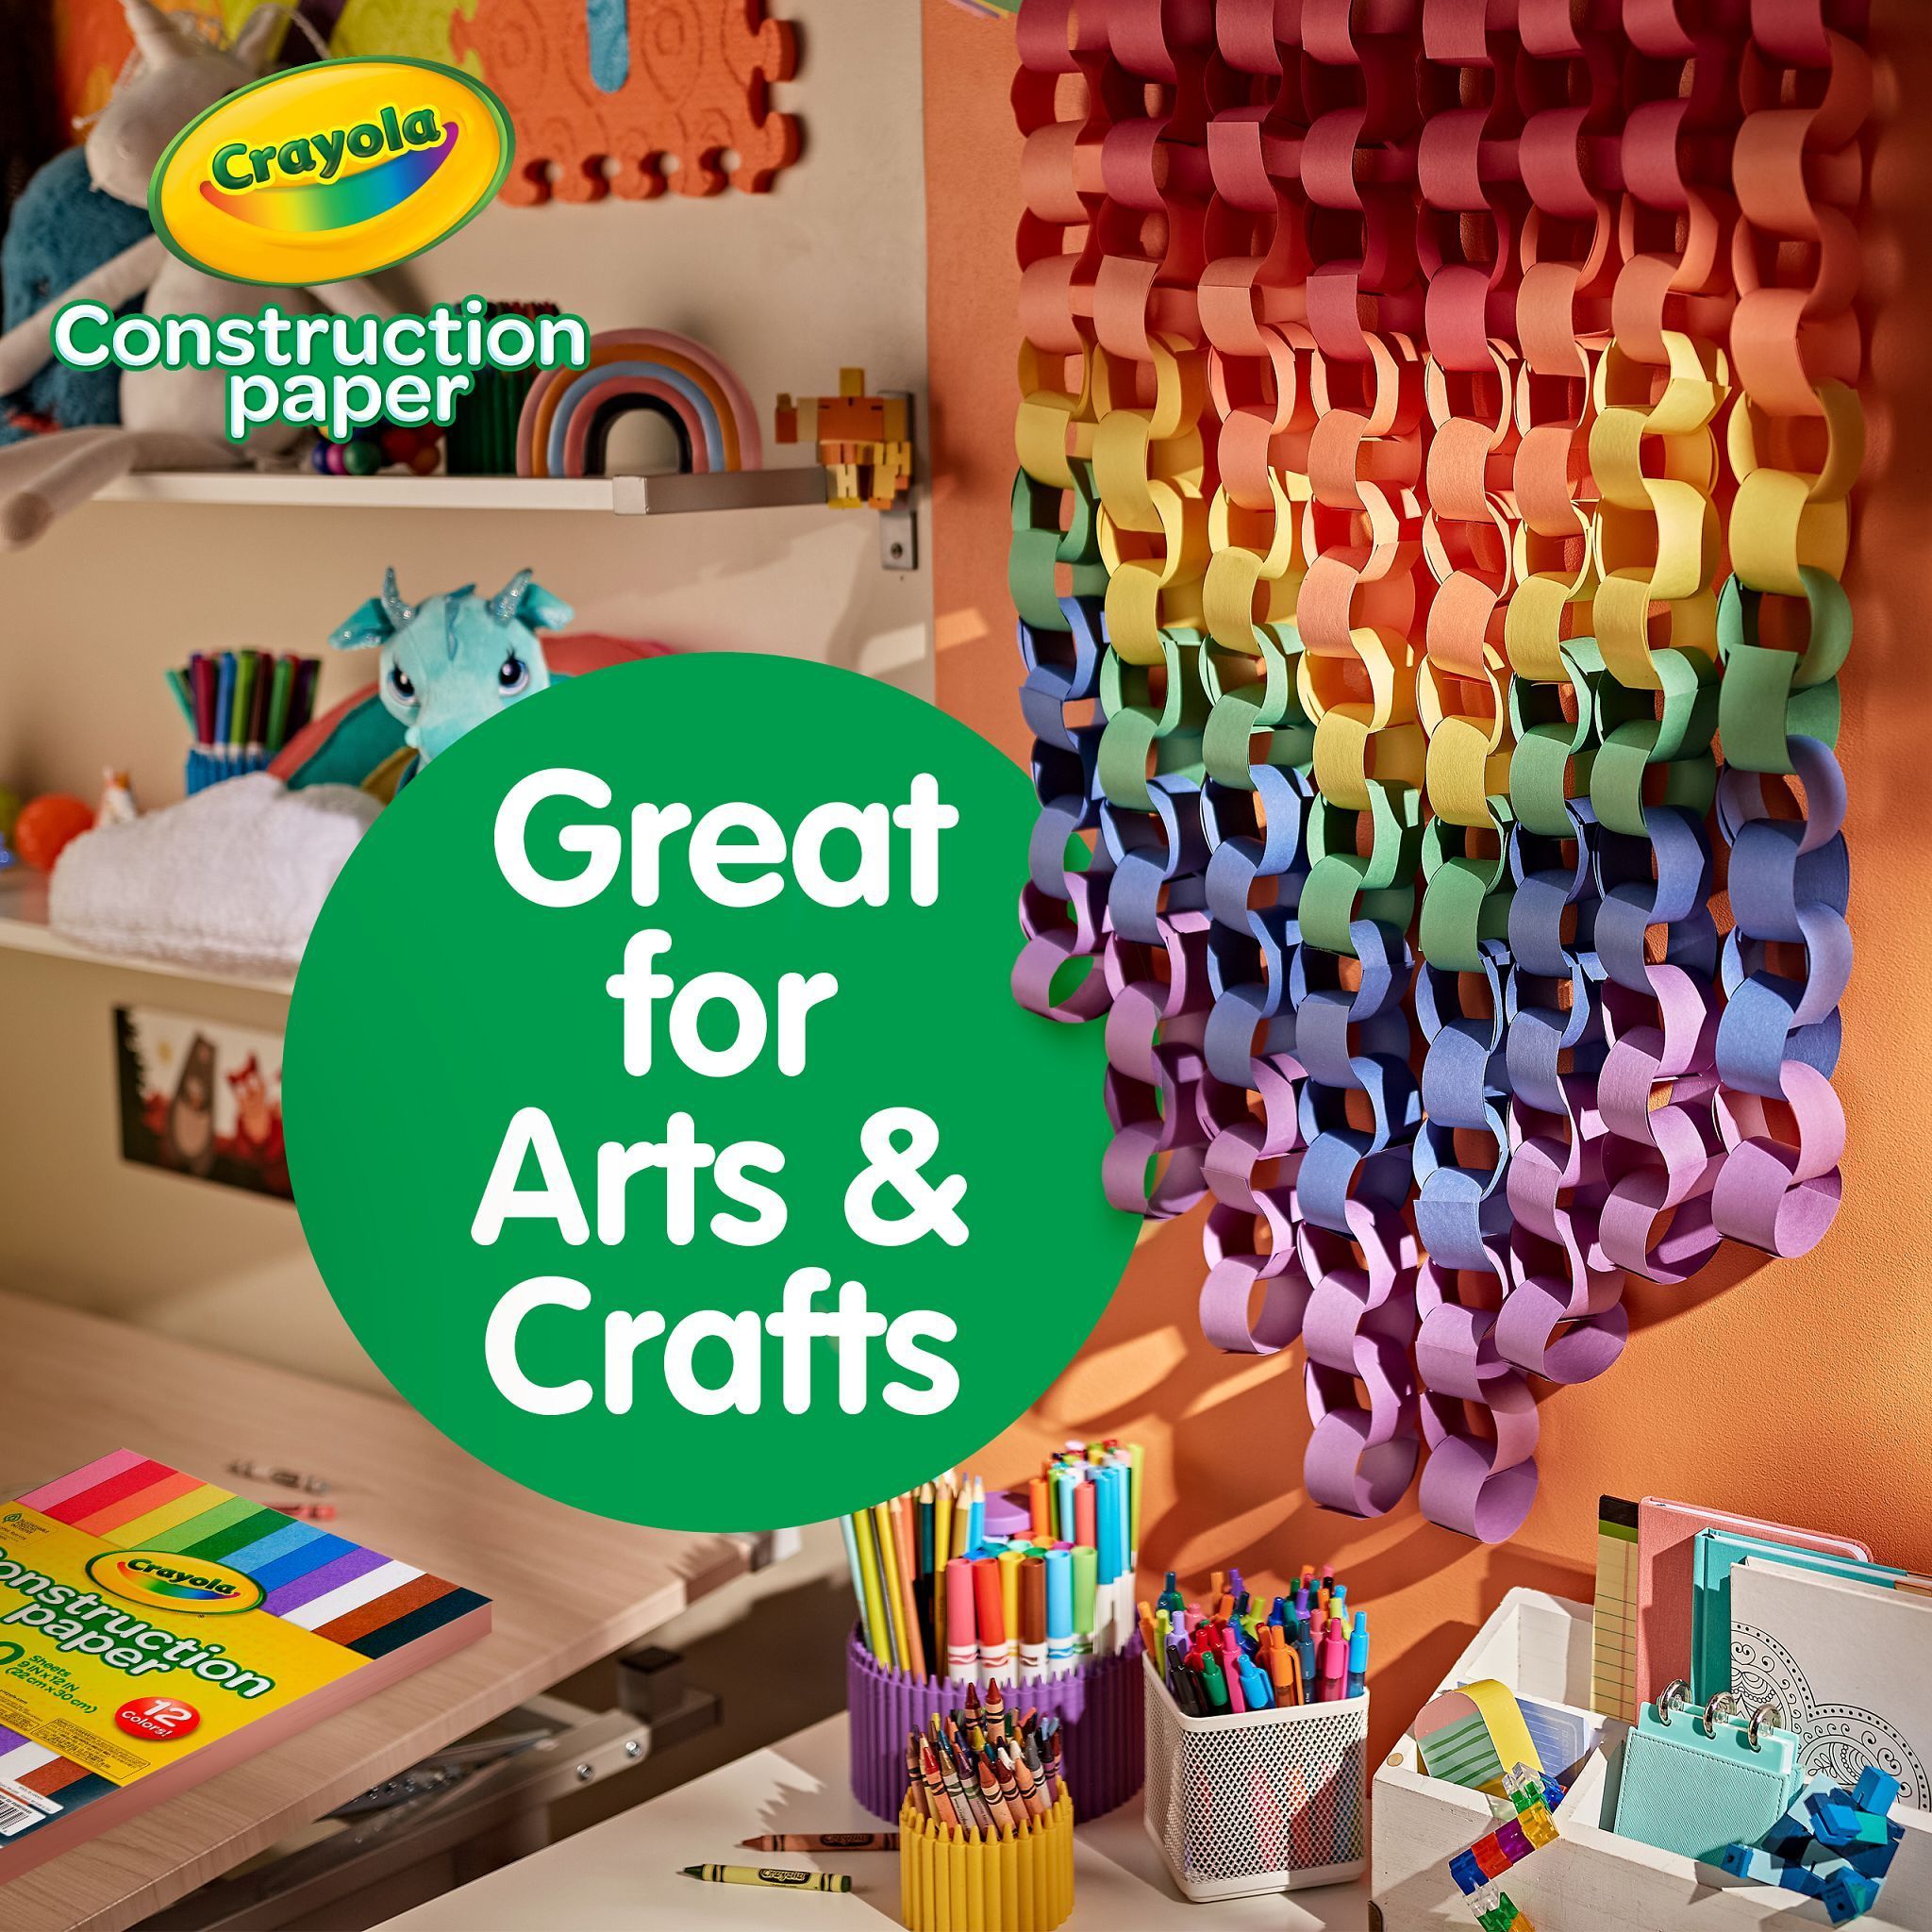 Crayola Construction Paper in 10 Assorted Colors, School Supplies, Beginner Child, 240 Sheets - image 4 of 8